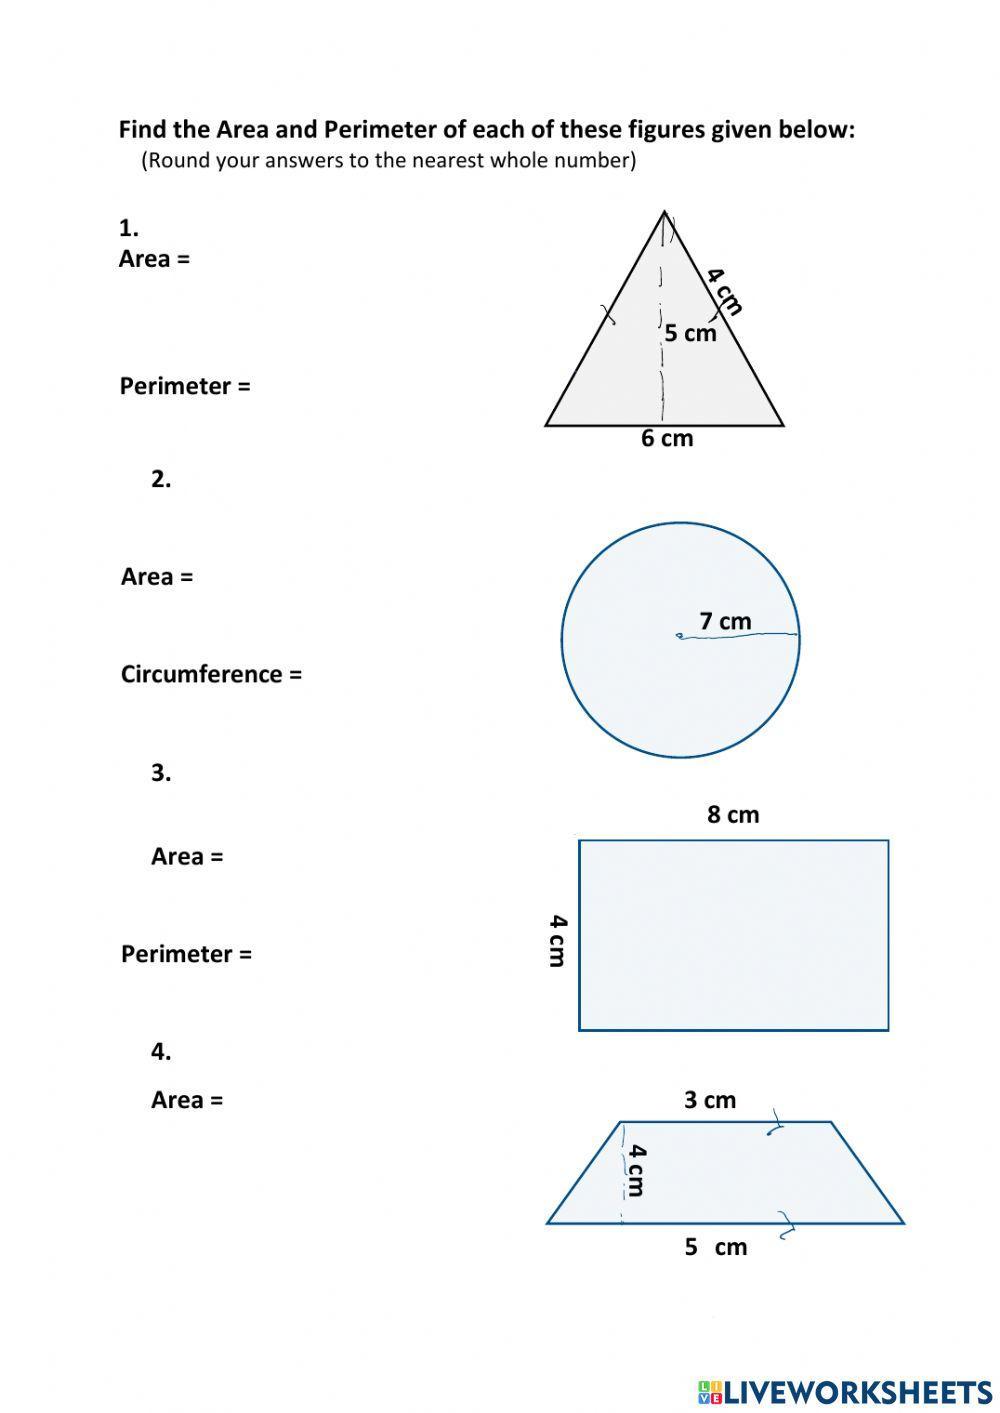 Areas and Perimeter